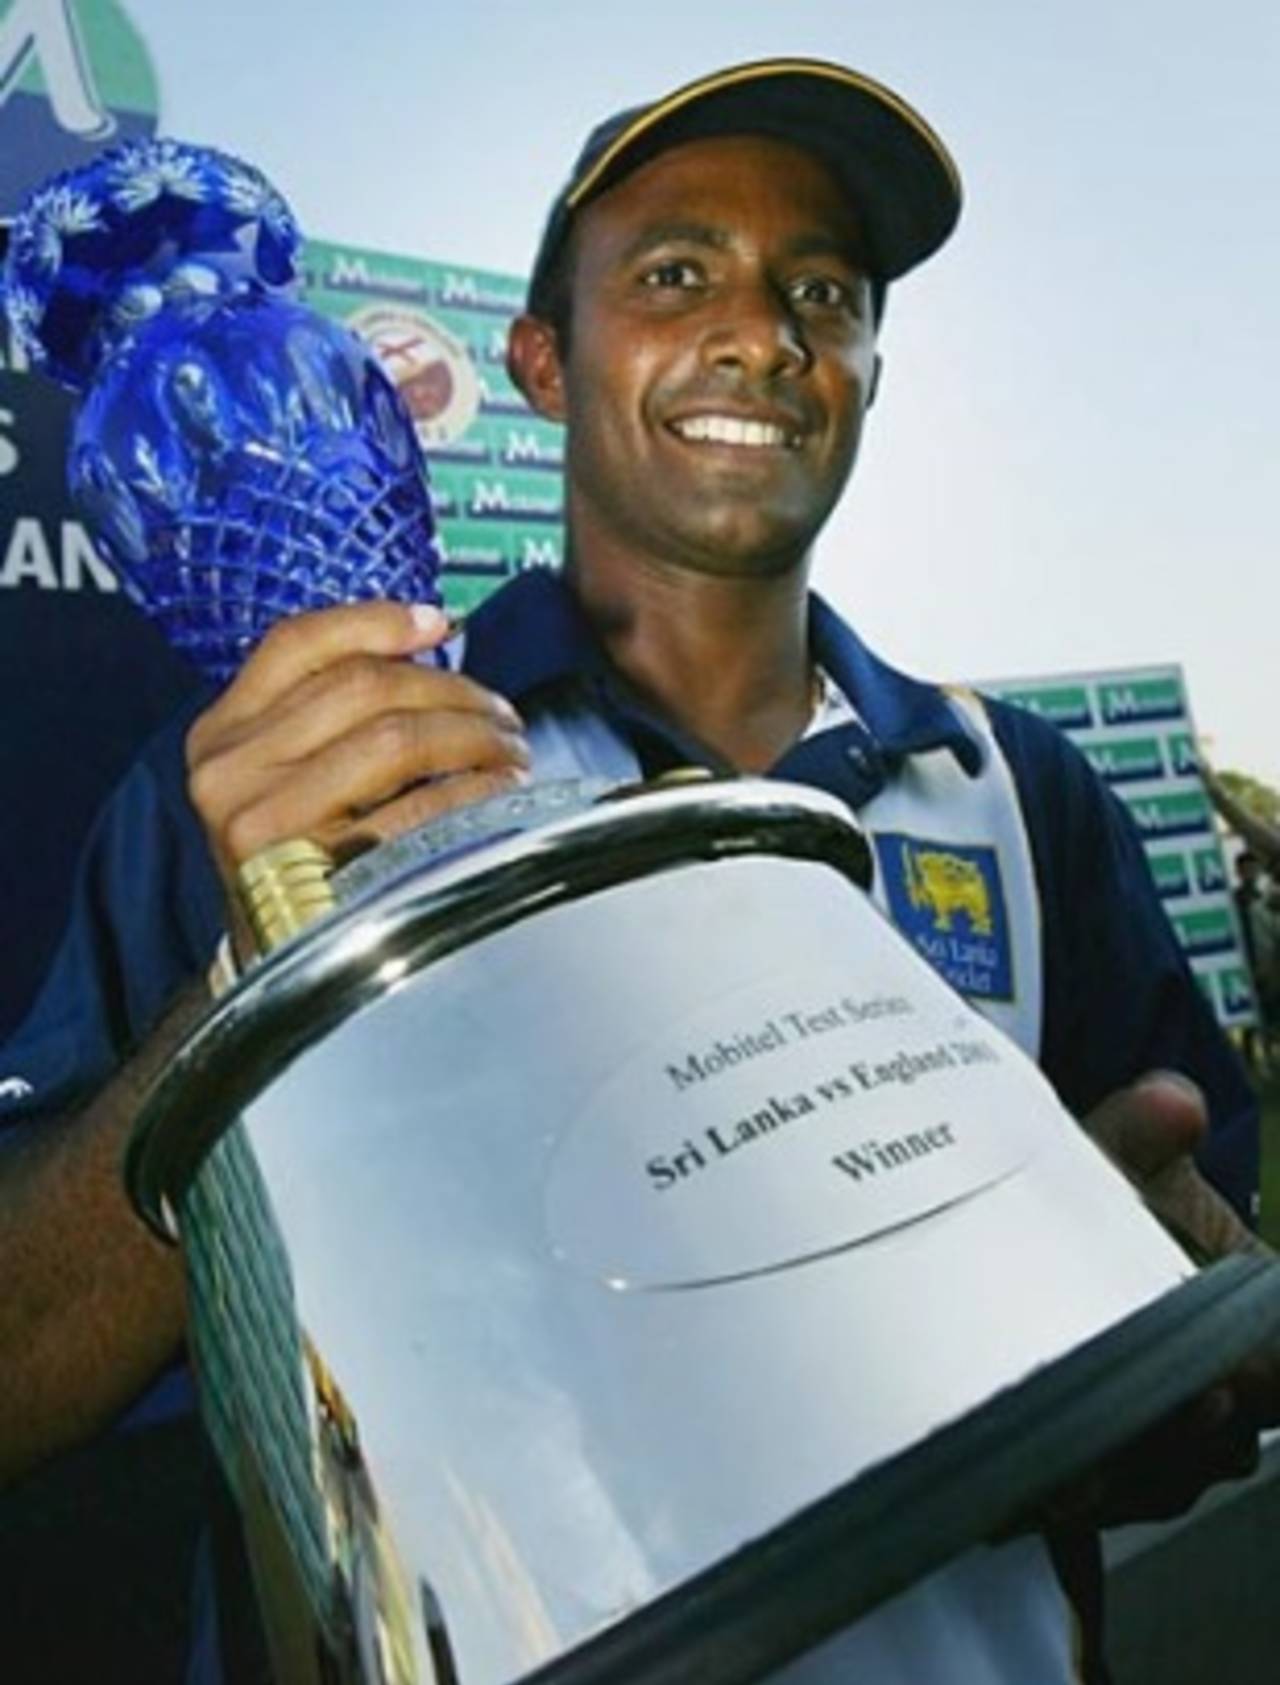 Hashan Tillakaratne has been asked to substantiate his claims&nbsp;&nbsp;&bull;&nbsp;&nbsp;Getty Images